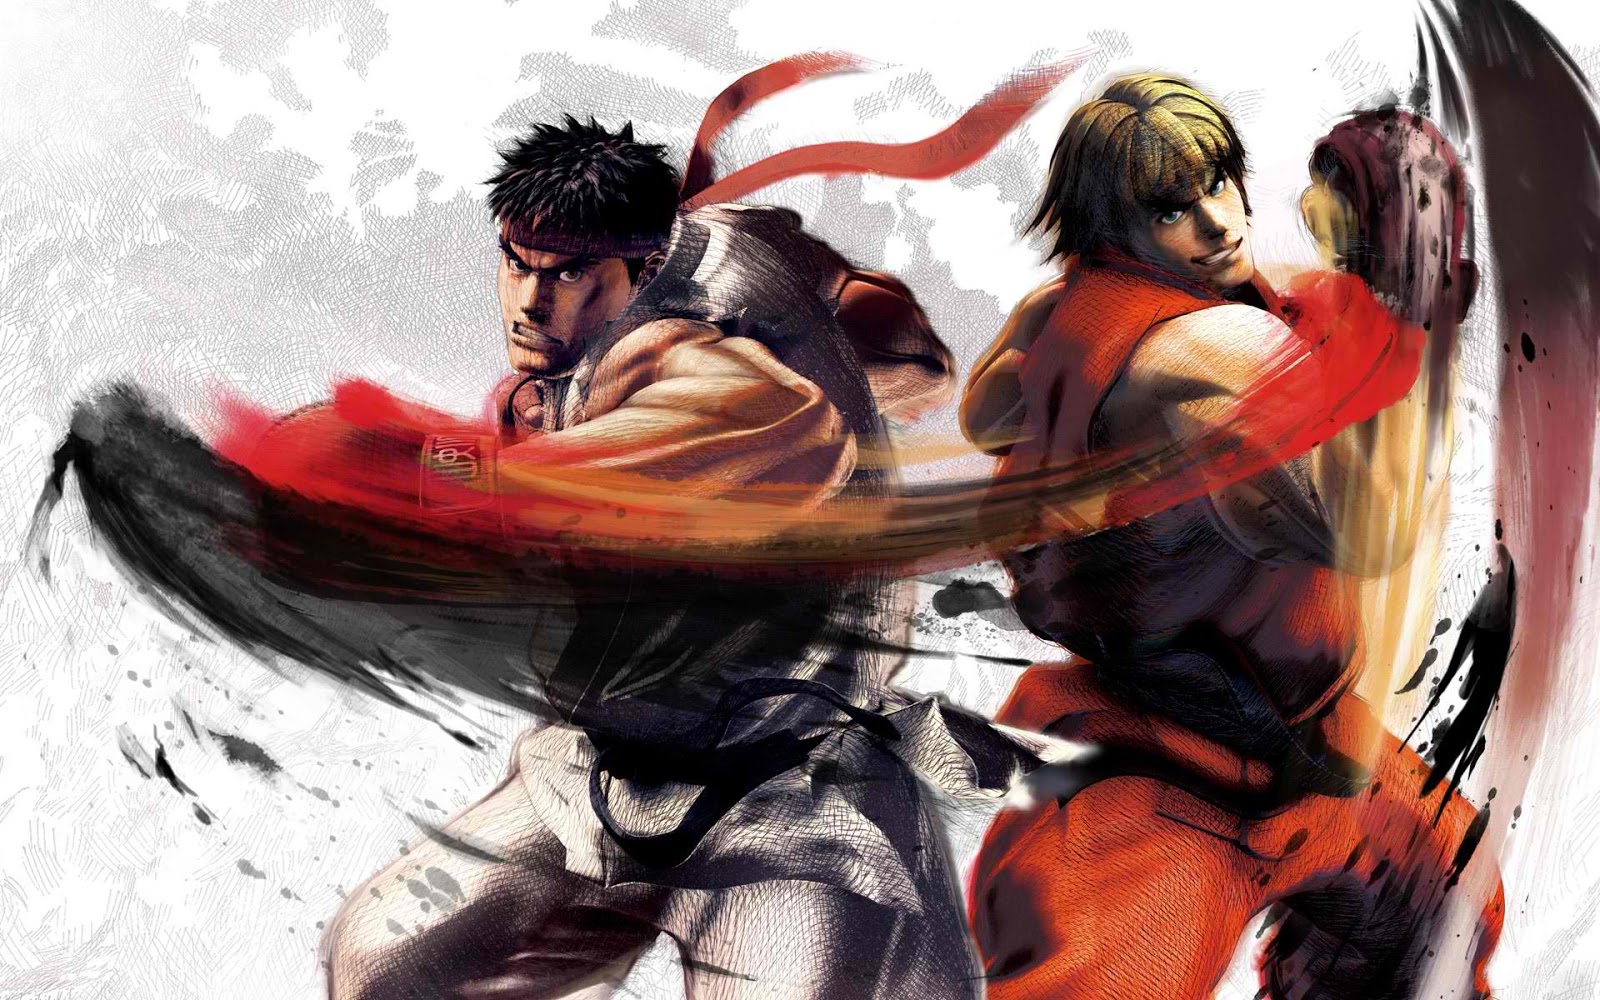 This Ultra Street Fighter Wallpaper Is Available In